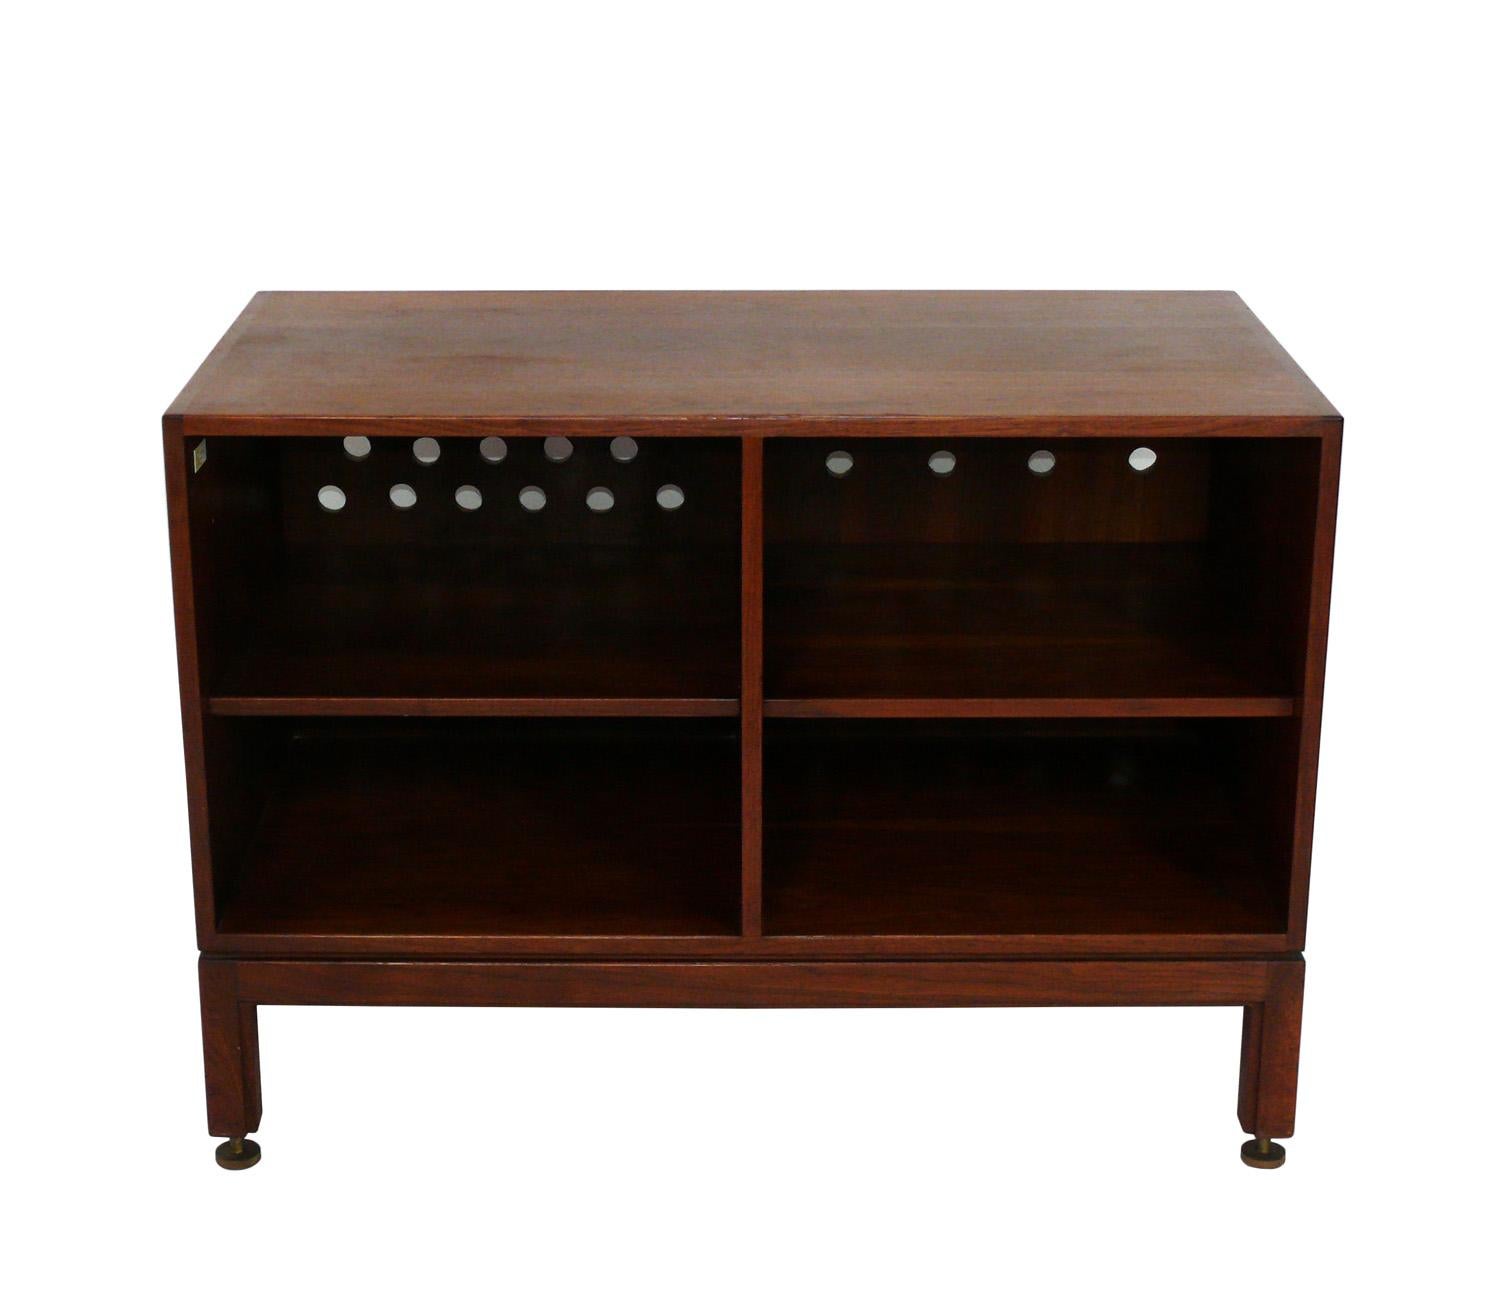 Clean Lined Walnut Credenza, designed by Jens Risom, American, circa 1960s. Signed with Risom label. Jens Risom was definitely influenced by Danish Modern design, and this piece is no exception, with a clean lined design in walnut with substantial